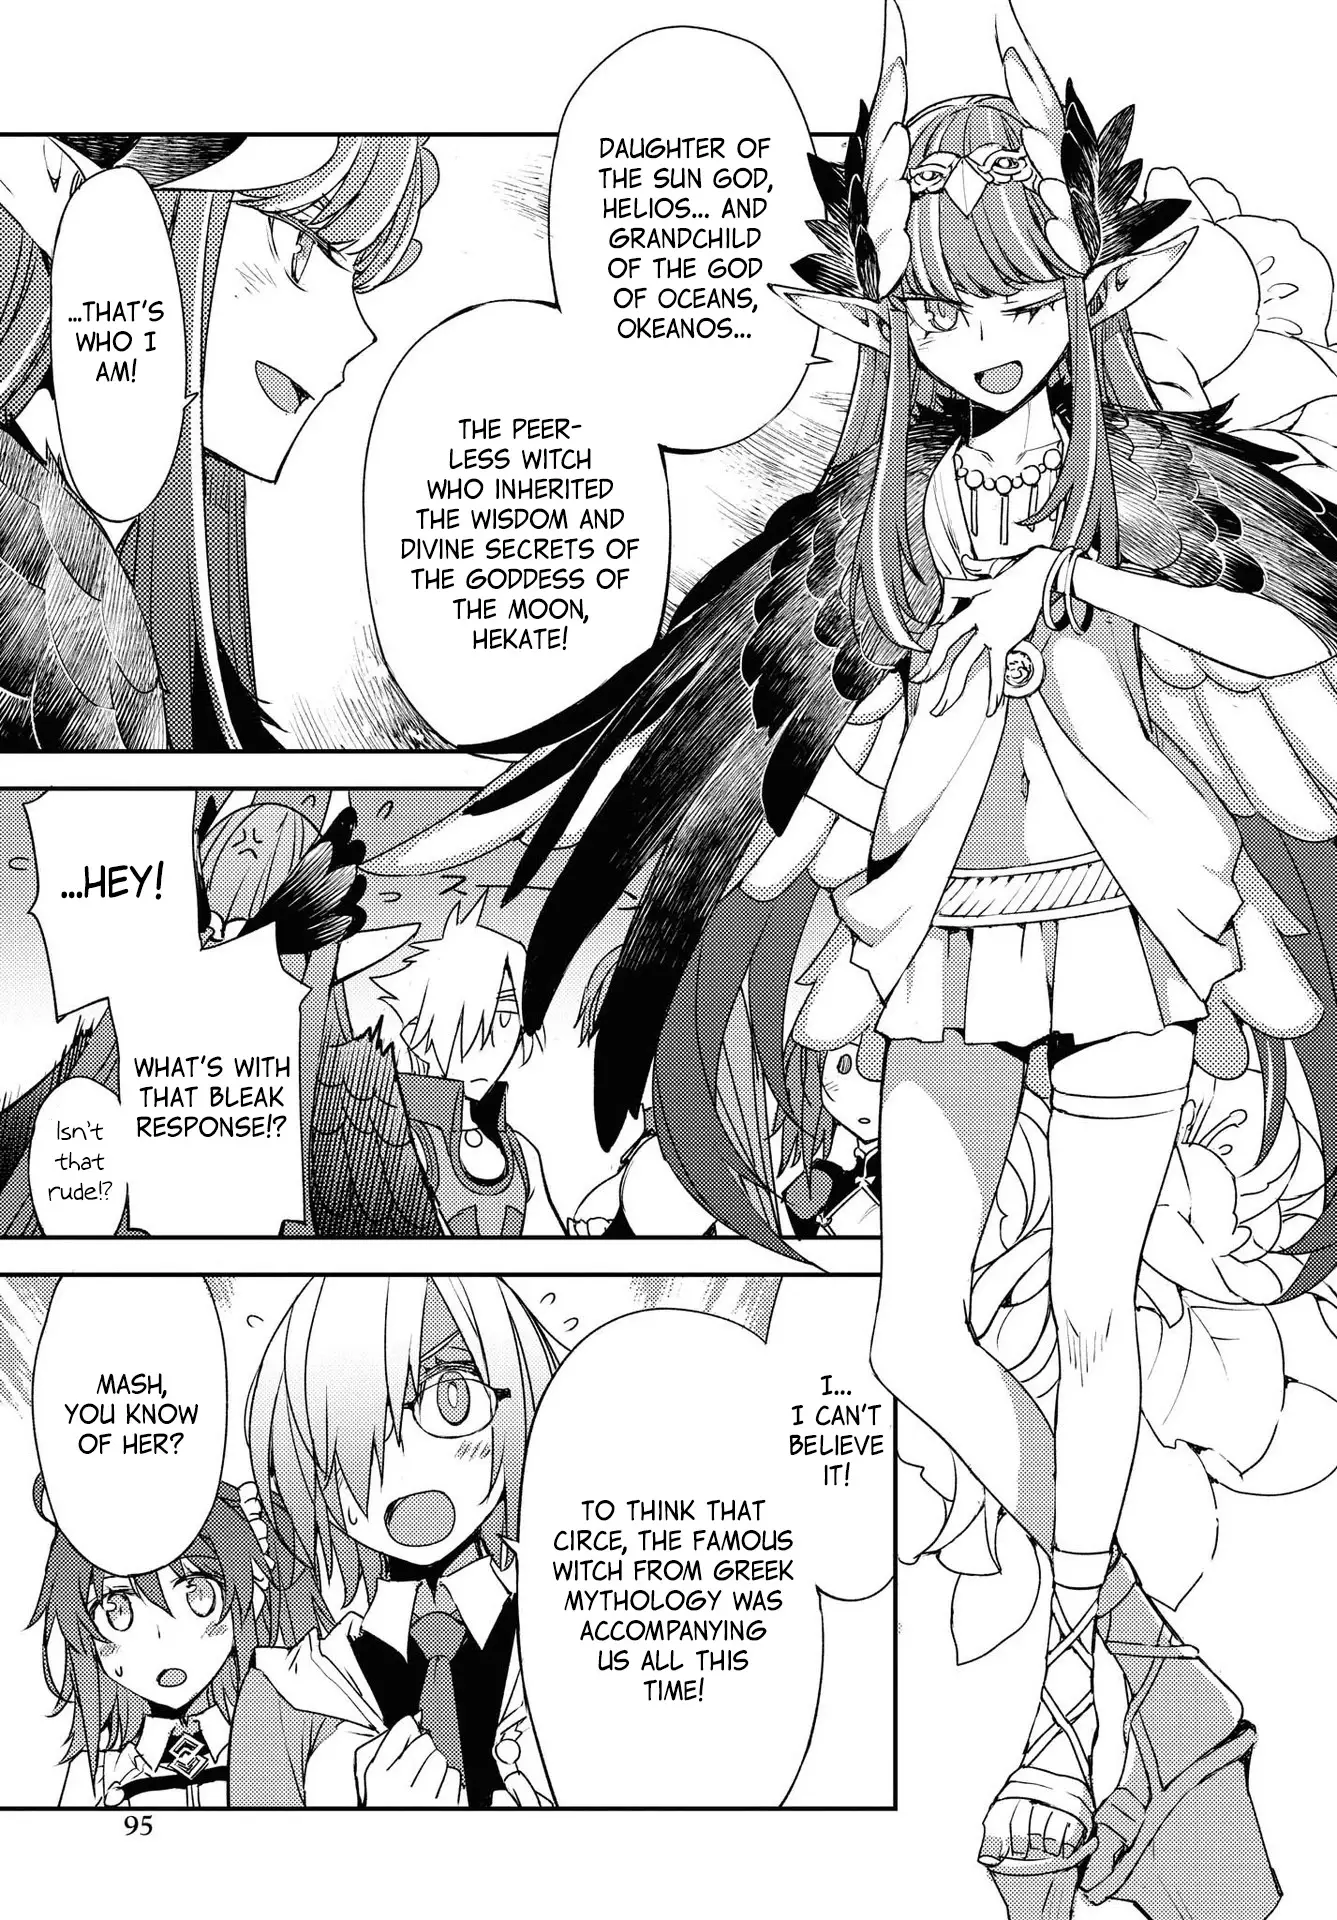 Fate/grand Order: Epic Of Remnant - Subspecies Singularity Iv: Taboo Advent Salem: Salem Of Heresy - 19 page 13